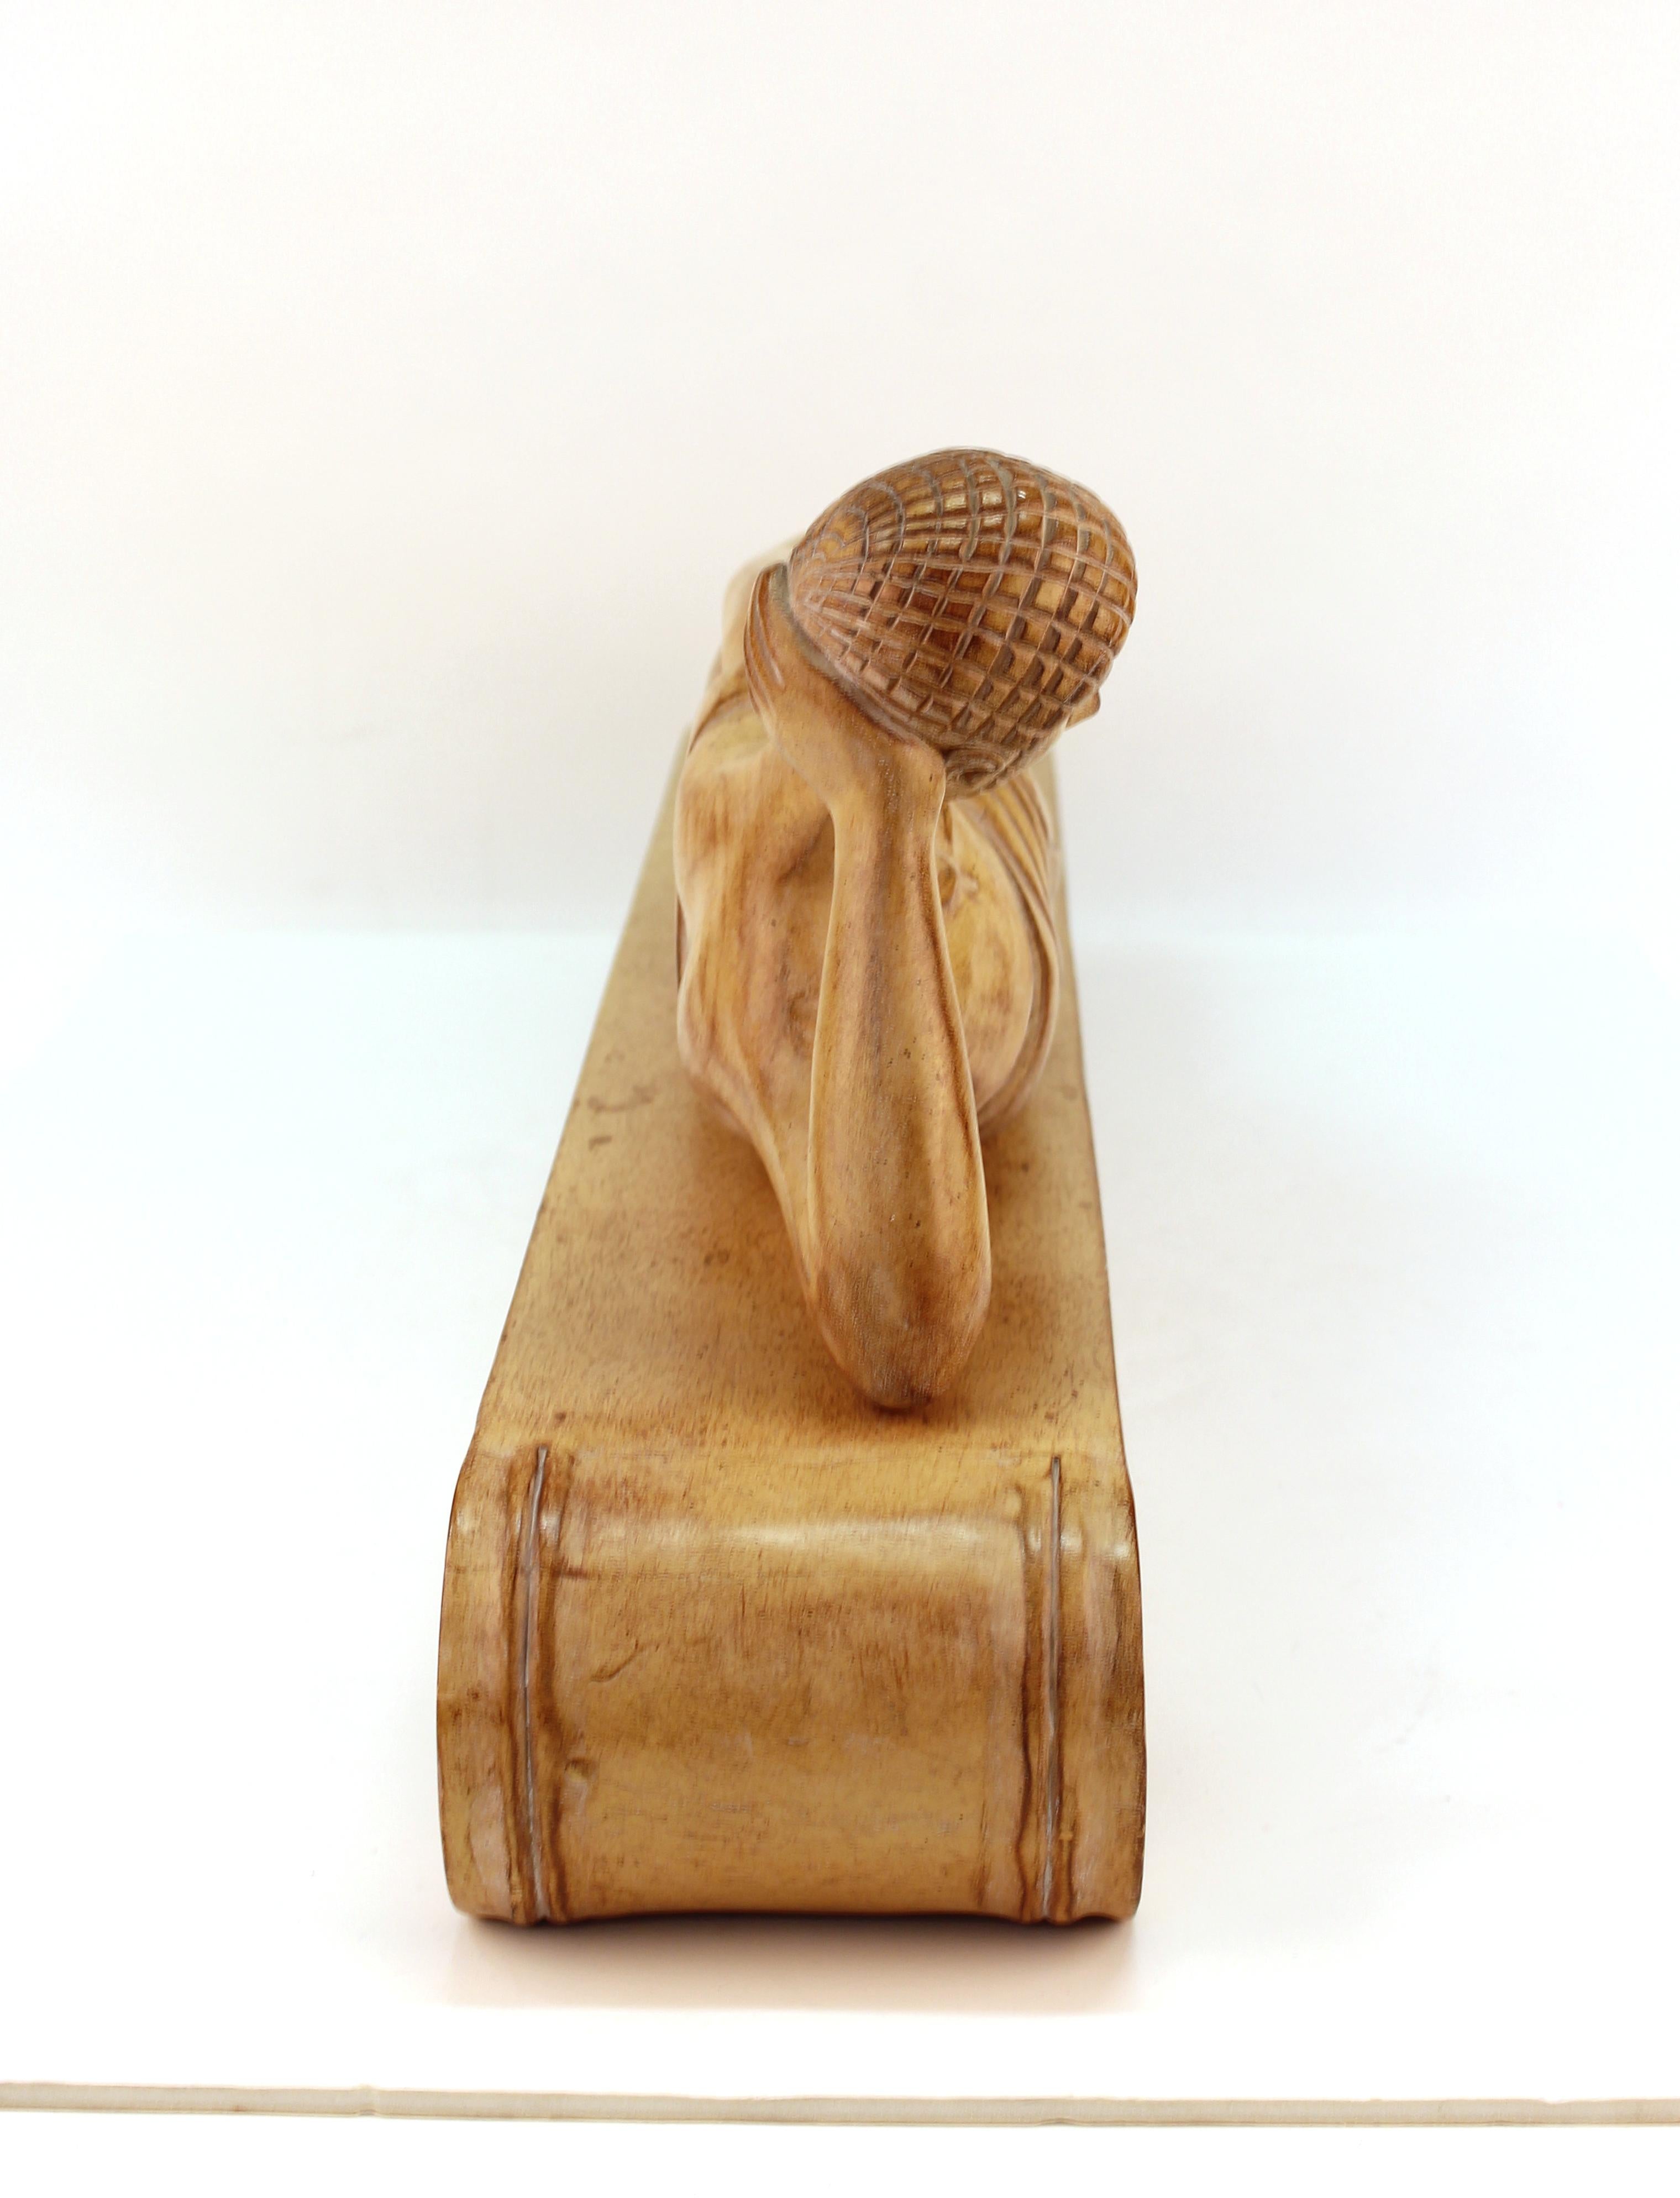 Hollywood Regency Etruscan Manner Wood Sculpture of a Reclining Woman